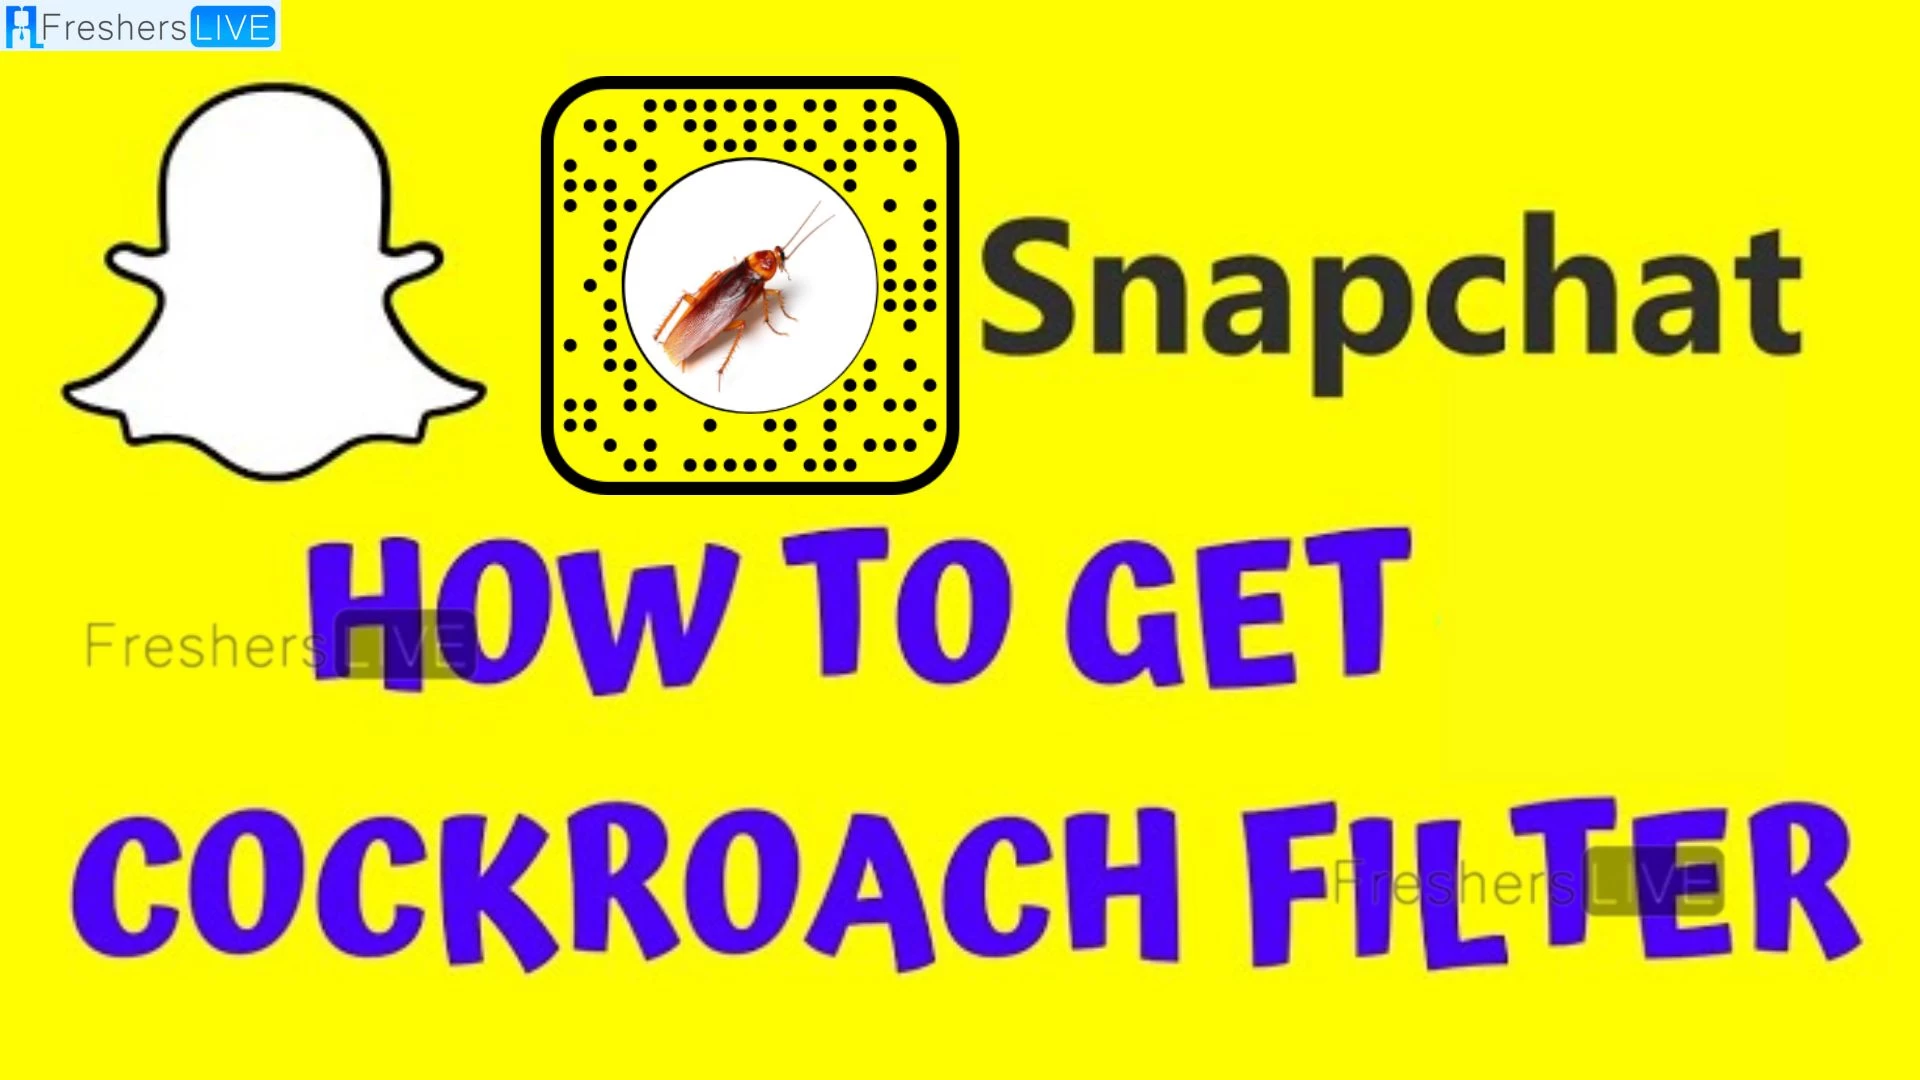 Cockroach Filter Snapchat, How to Get Cockroach Filter on Snapchat?